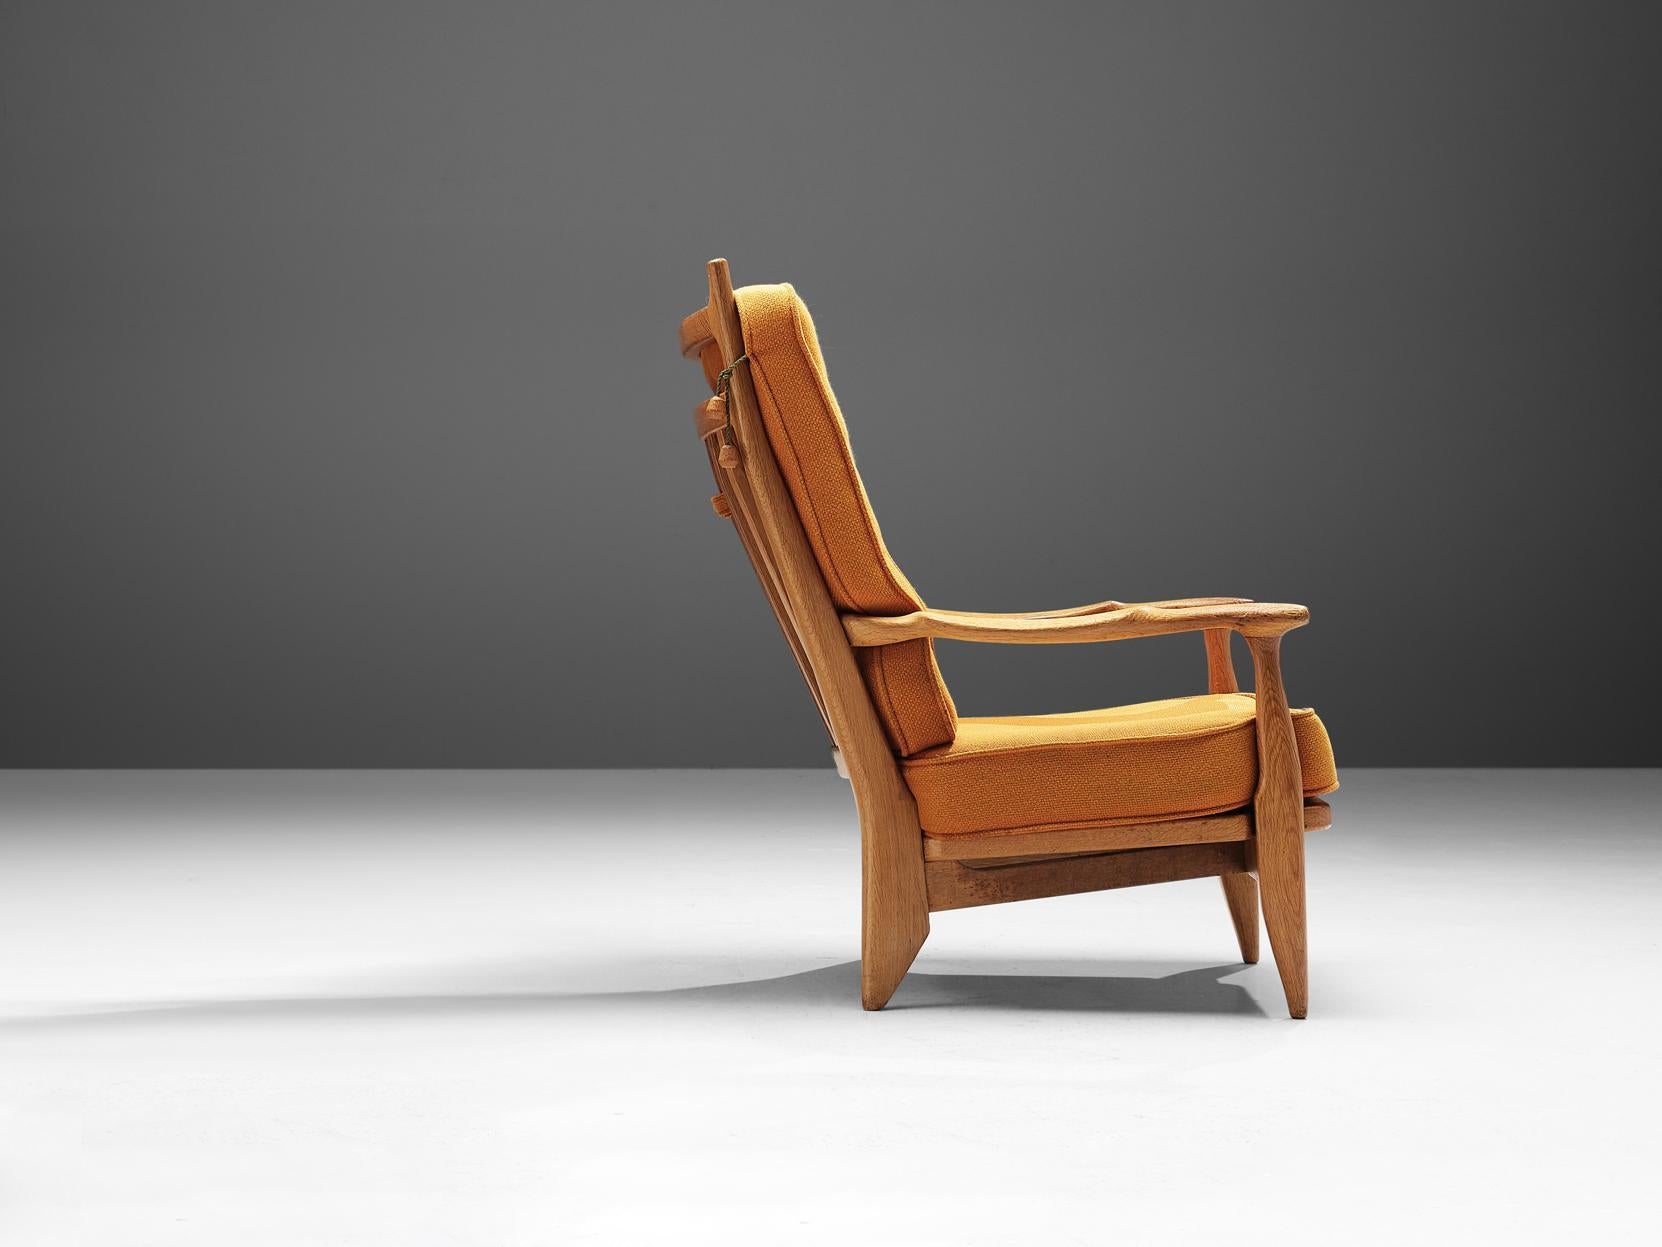 Guillerme & Chambron Lounge Chair in Oak and Ocher Yellow Upholstery